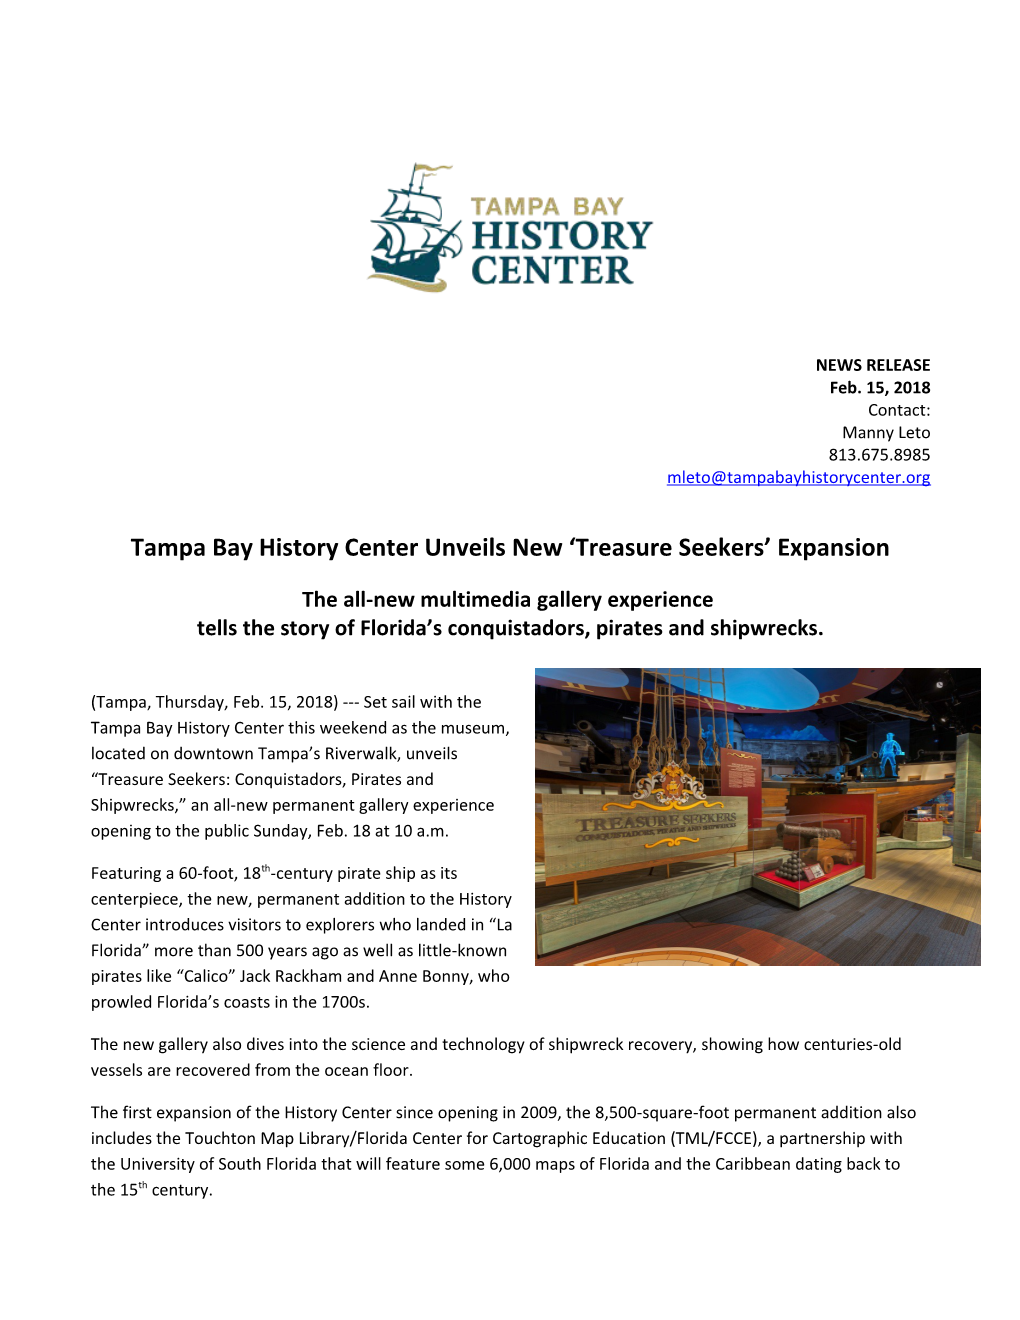 Tampa Bay History Center Unveils New Treasure Seekers Expansion